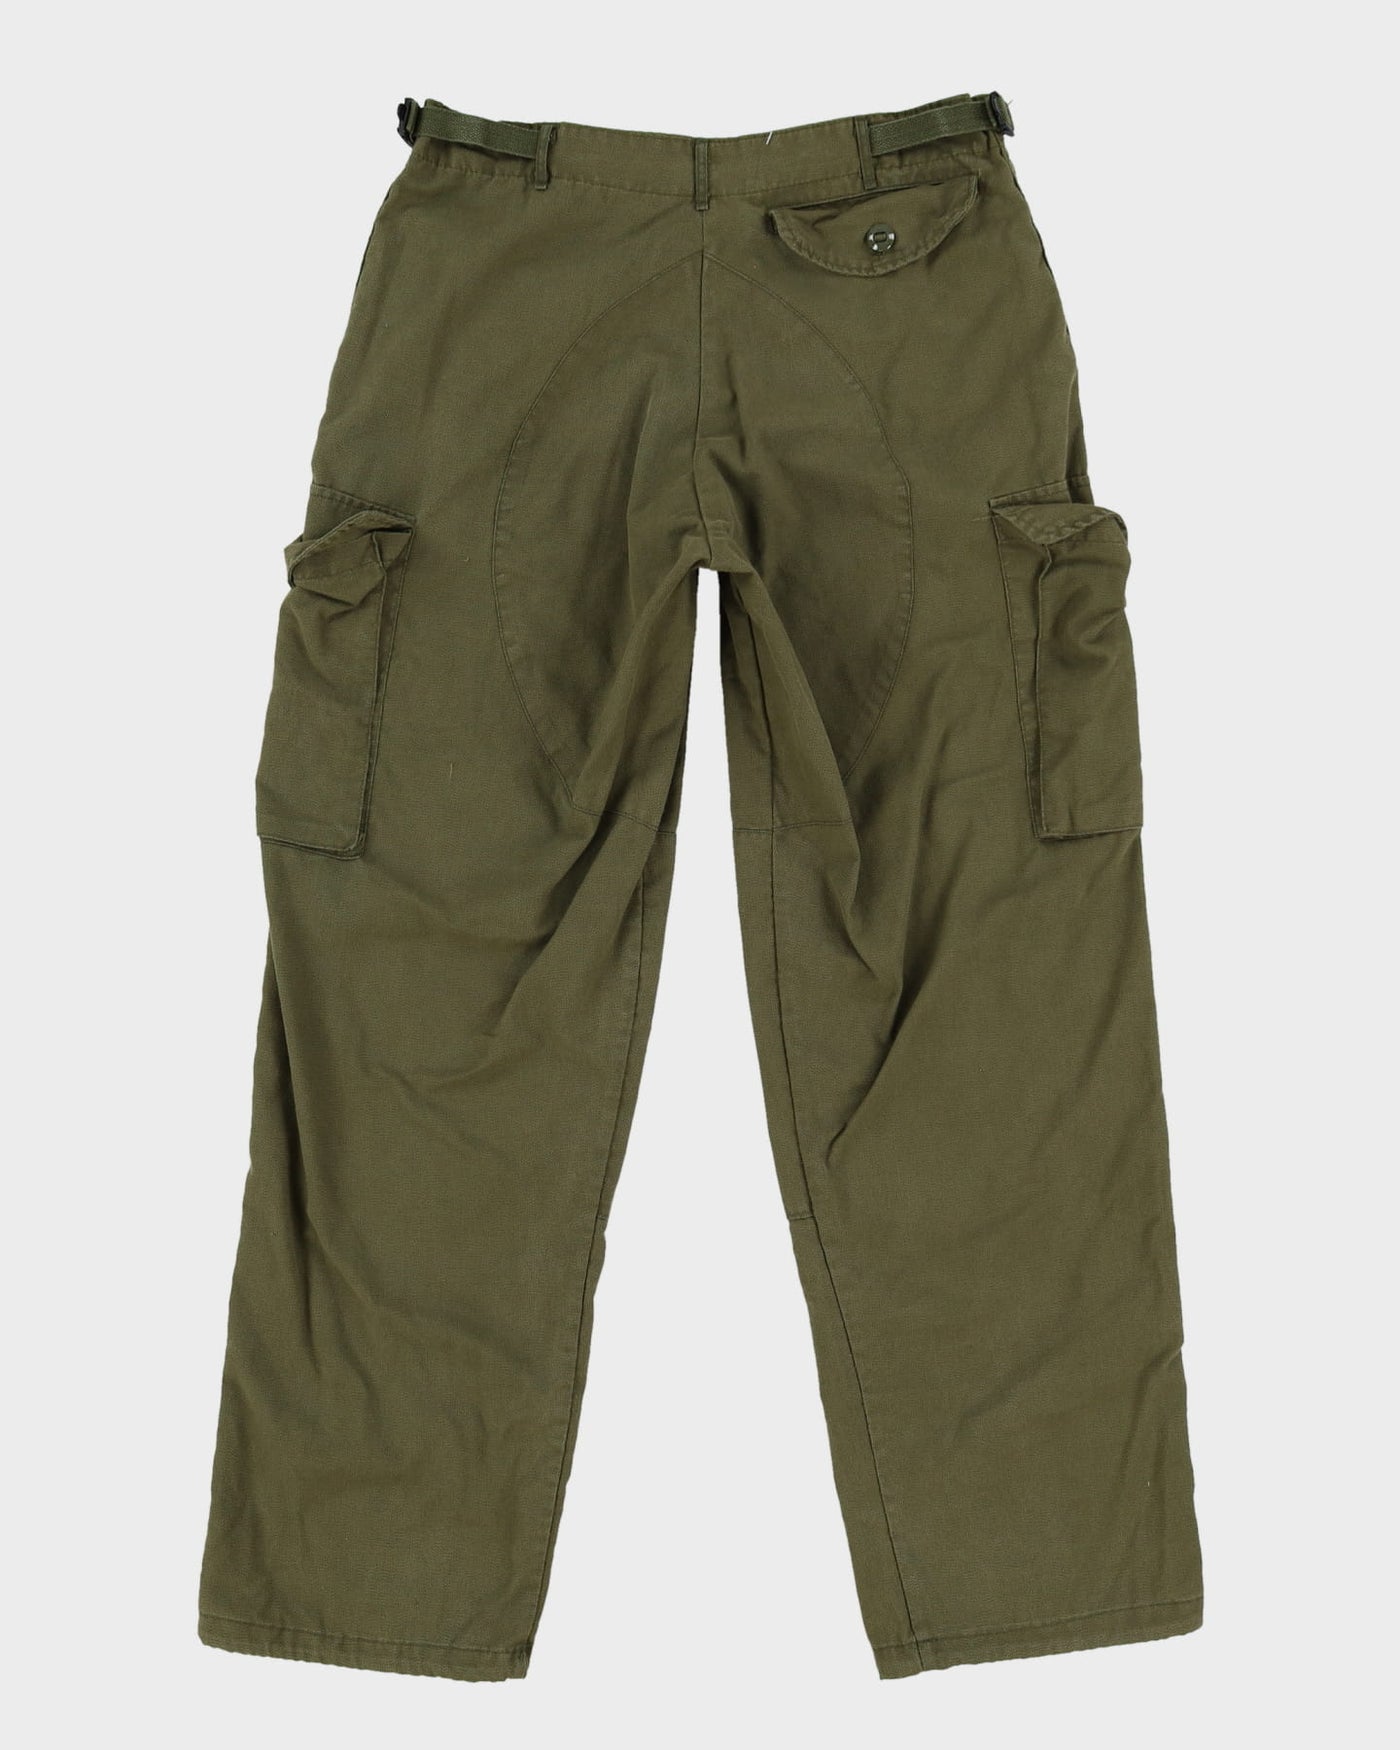 1980s Vintage Canadian Army Lightweight Combat Trousers - 30x30